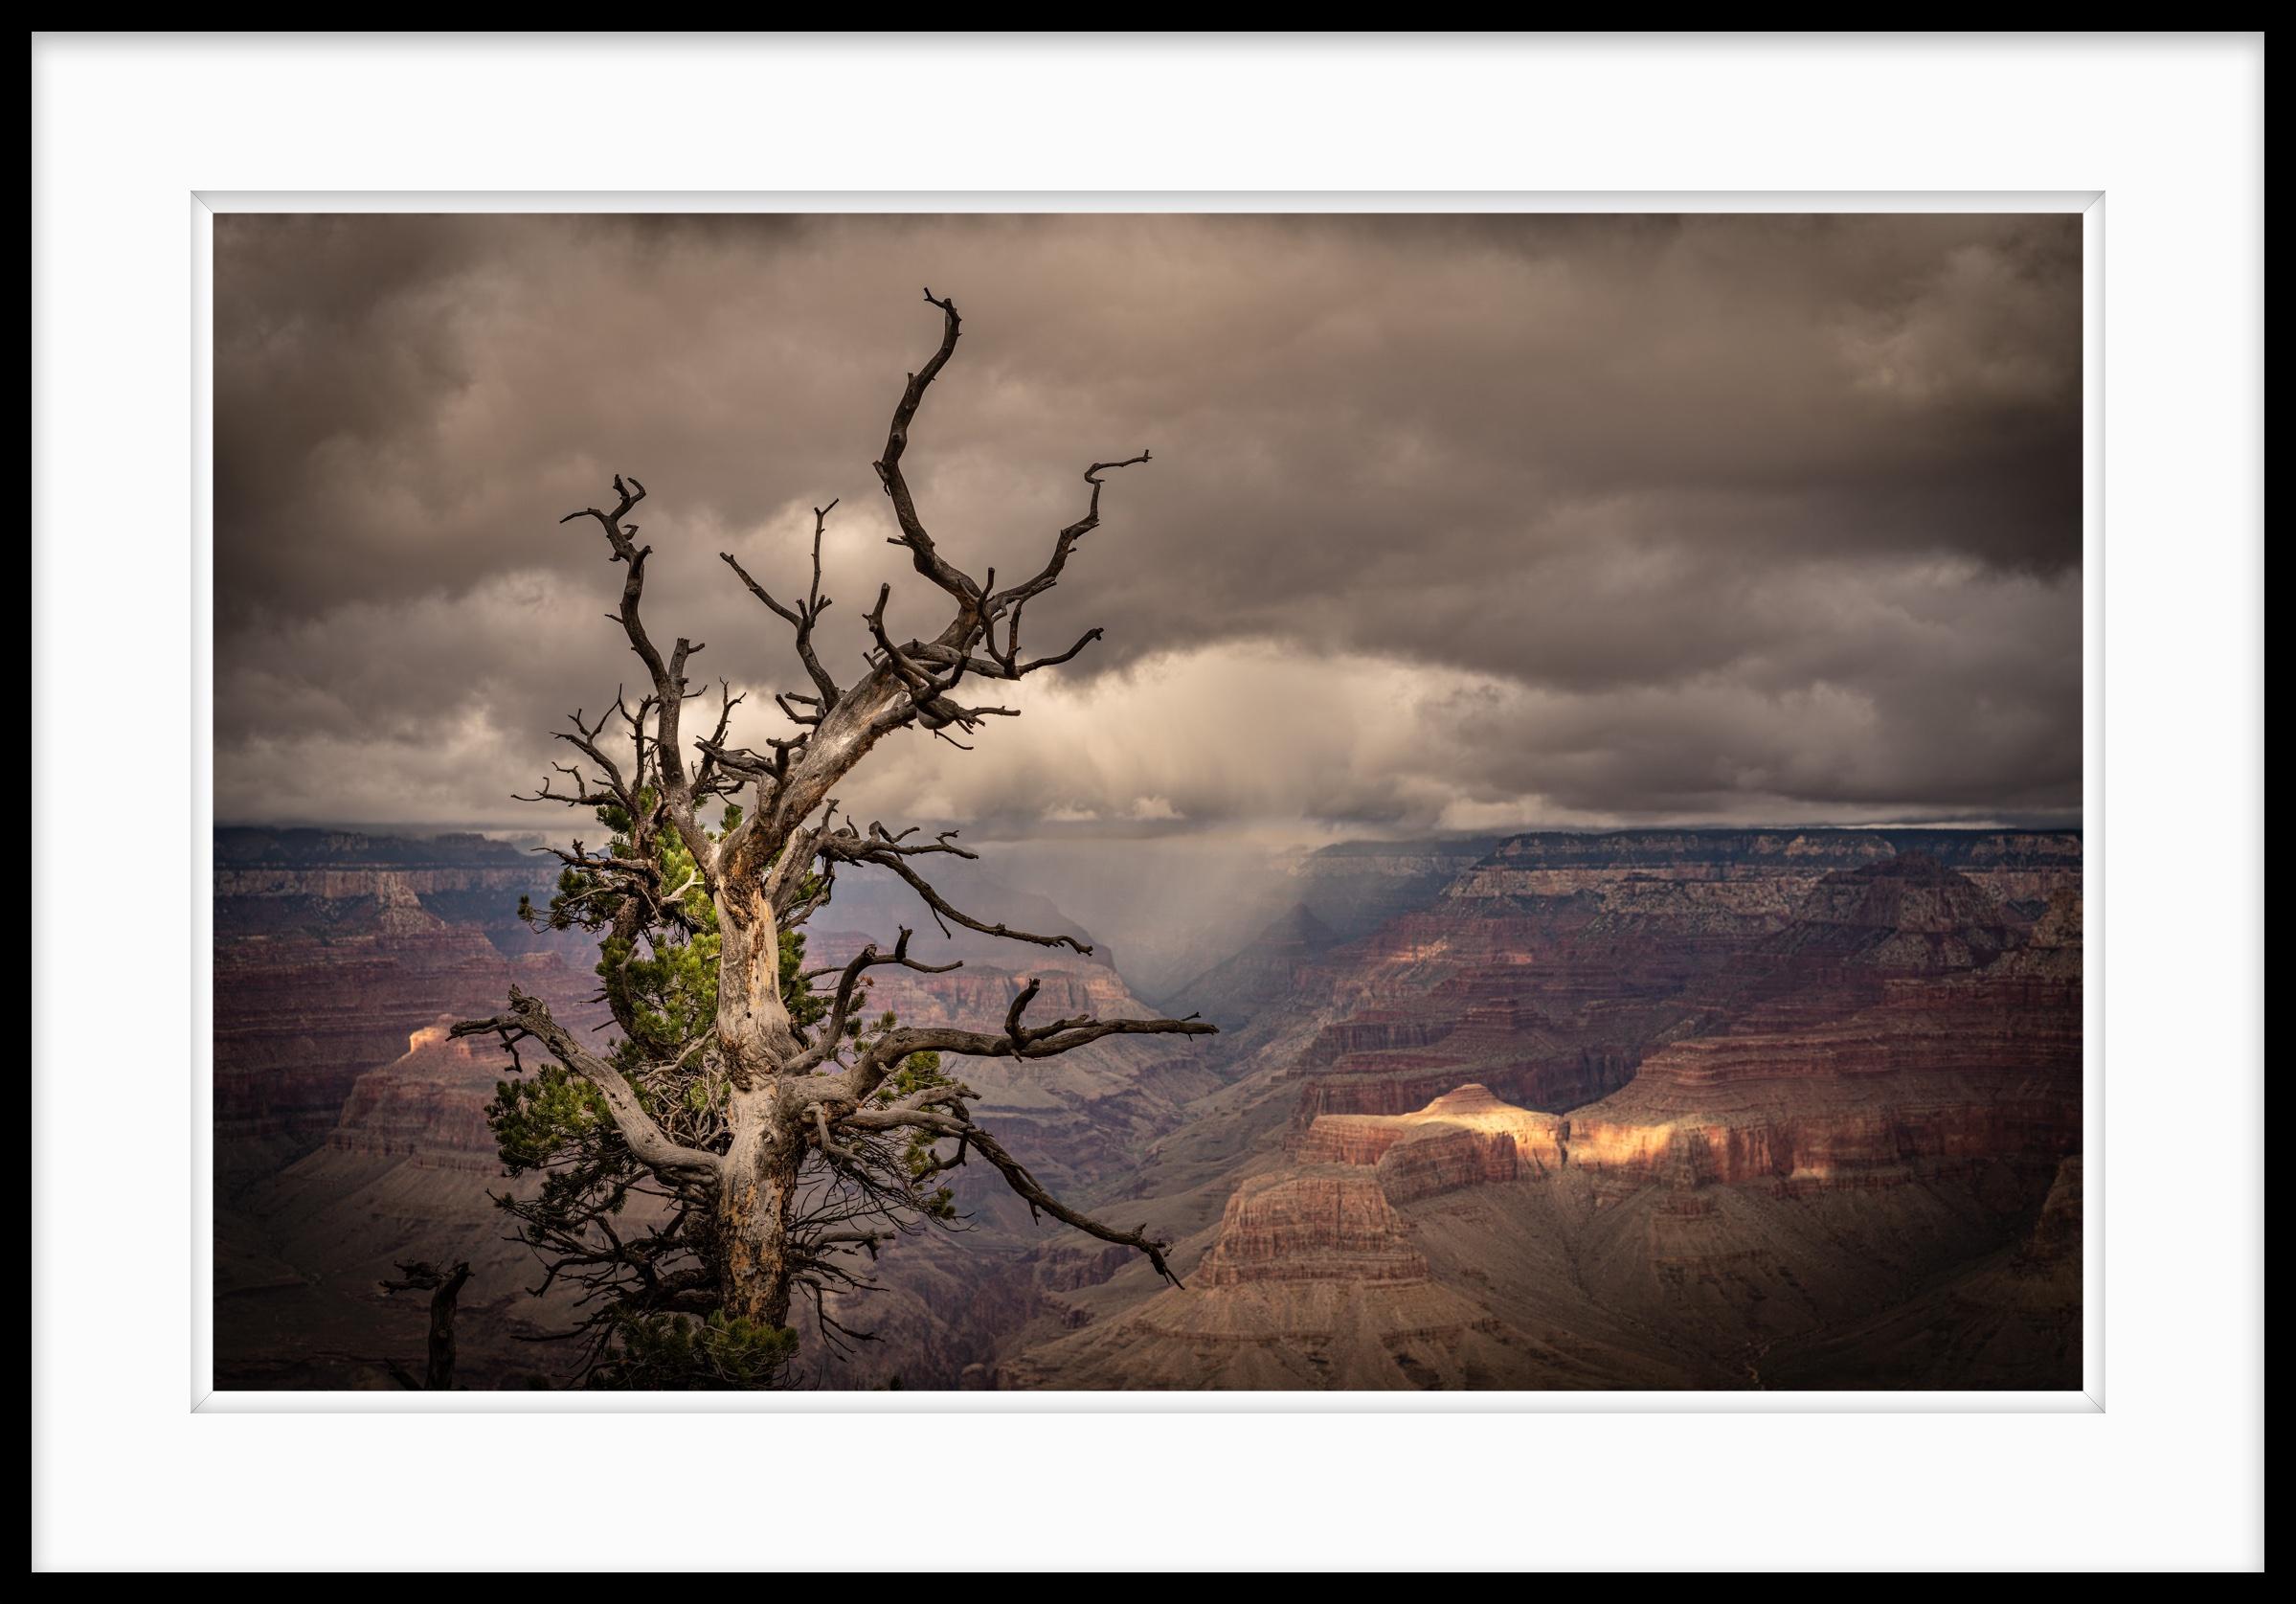  Limited Edition Color Photograph - Tree, Grand Canyon, - Landscape. The image is called Gnarly Tree and Canyon. This very old tree was taken on a photographic road trip through the American West and around the Grand Canyon. A pop up rain storm is